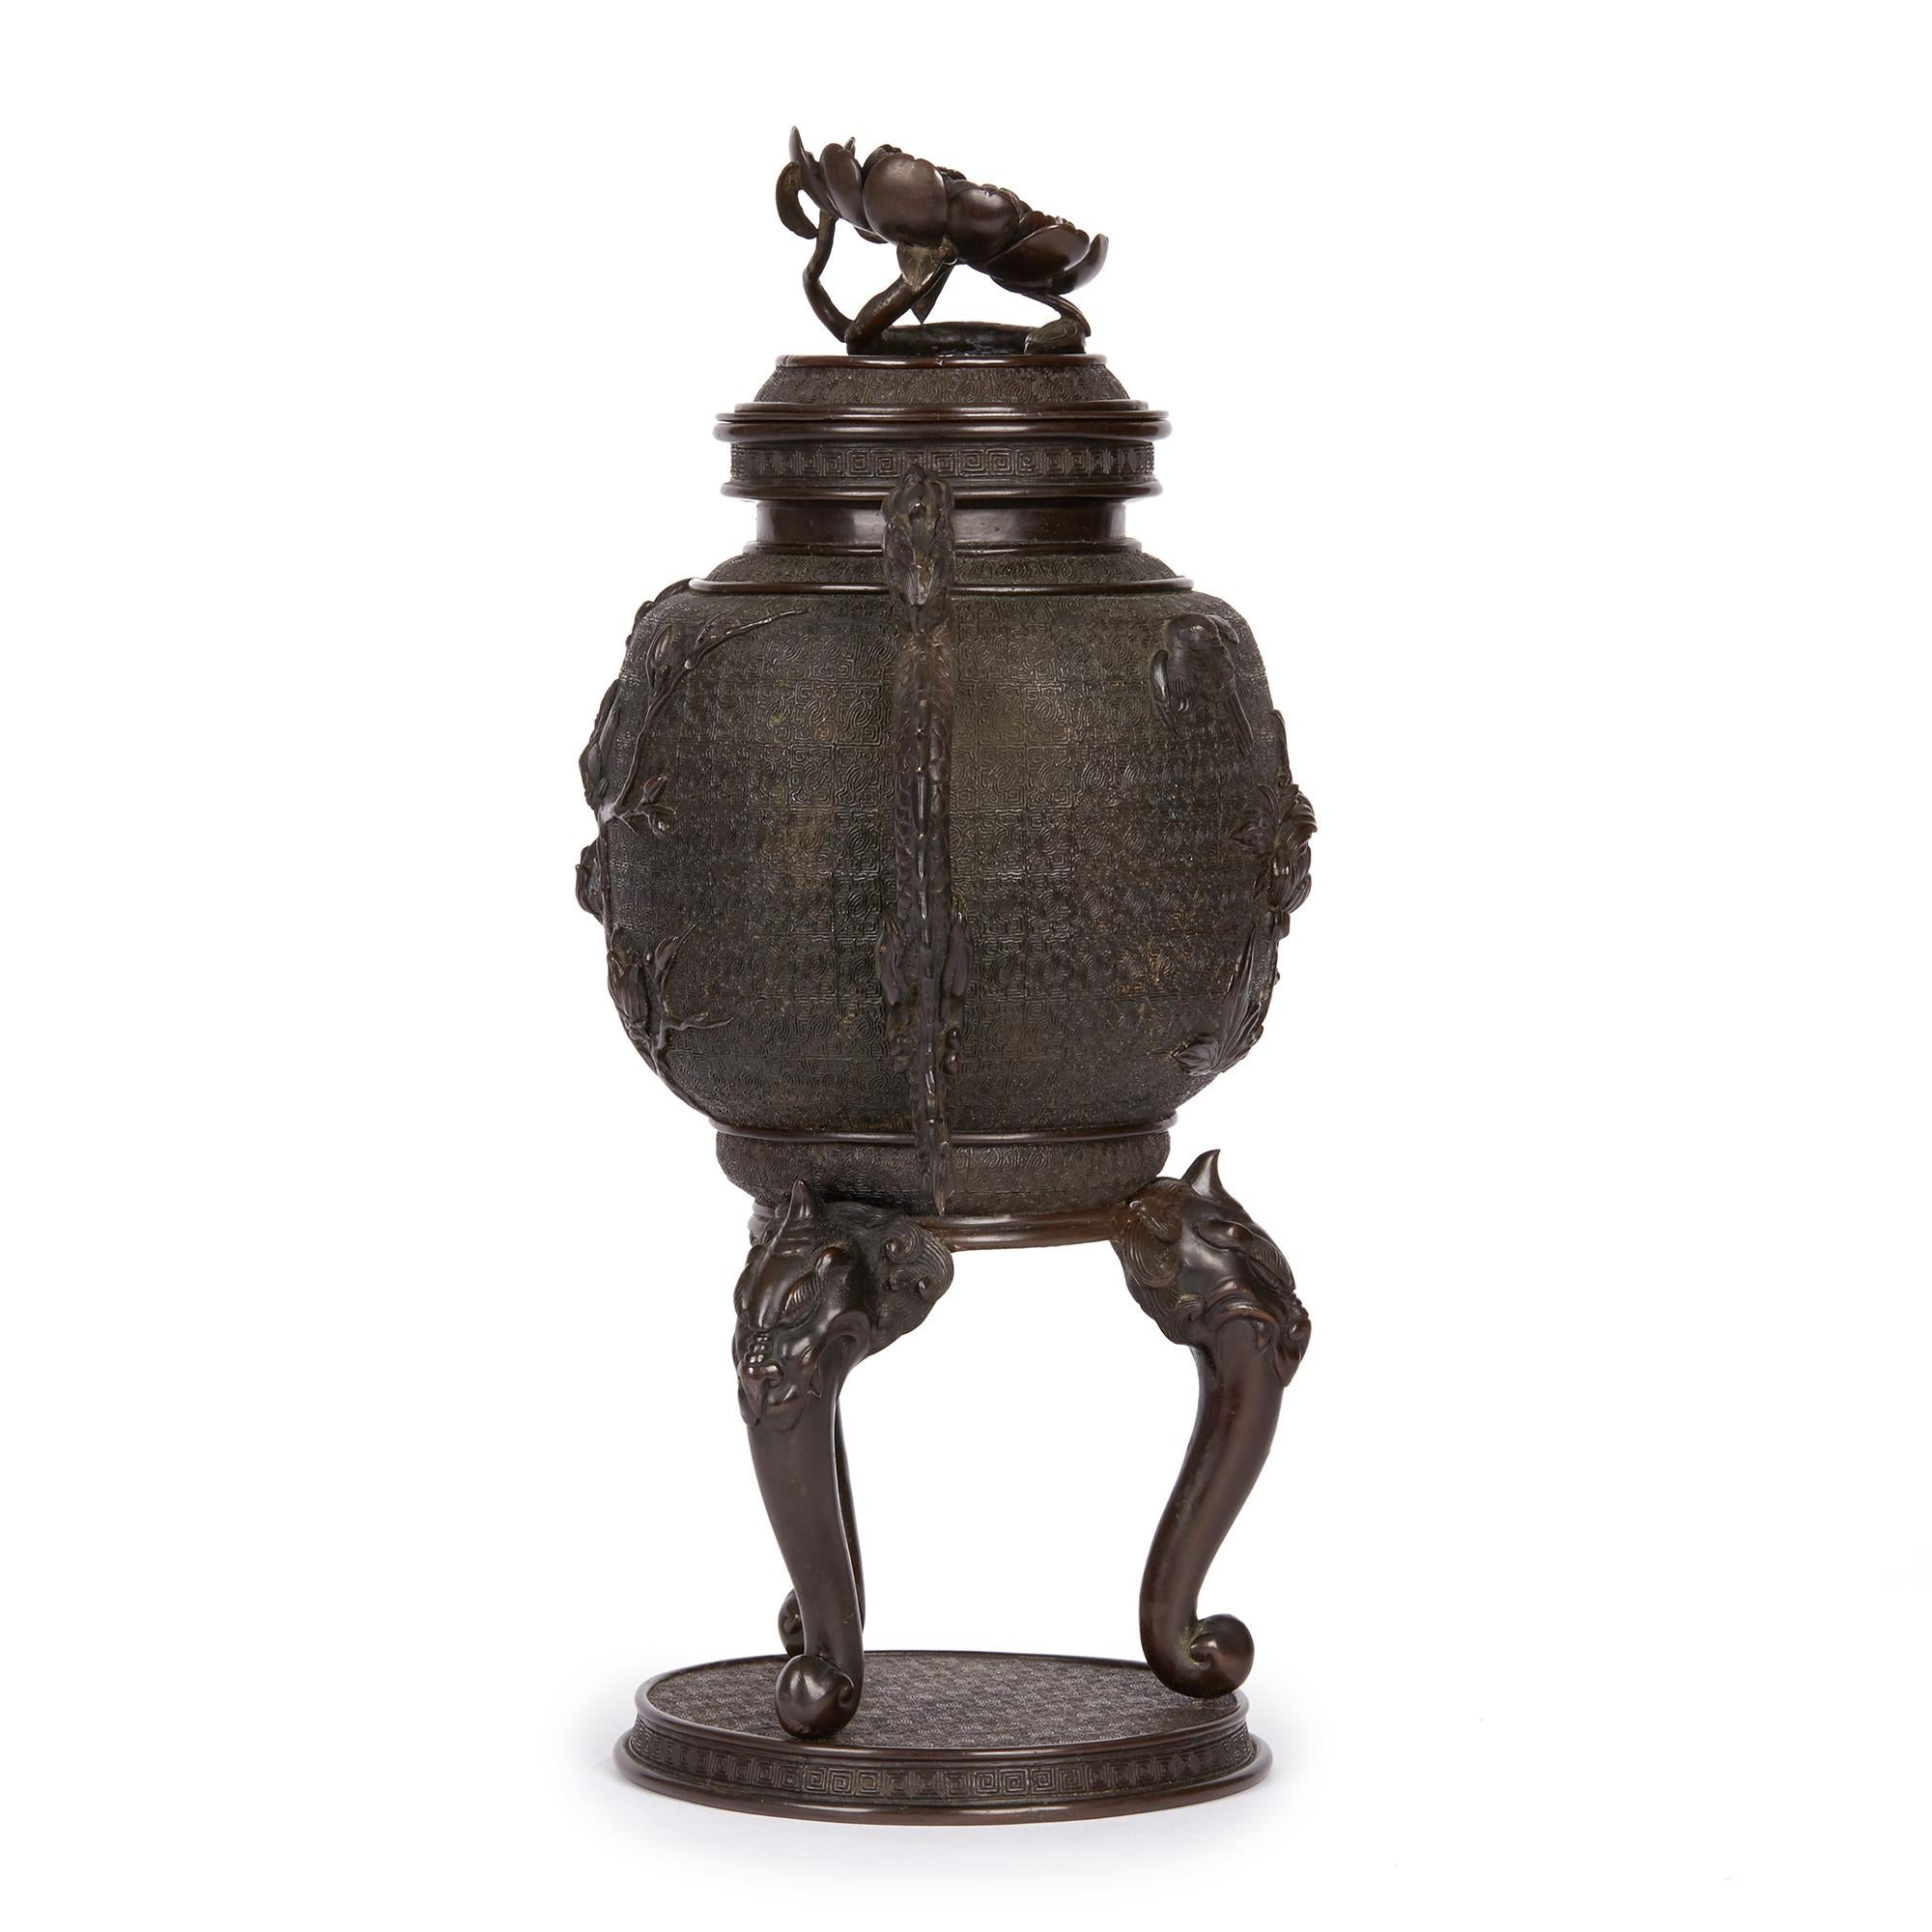 A large and stylish antique Japanese Meiji bronze lidded twin handle urn standing on a rounded plinth base with tongue and grotesque head formed legs with dragon handles and a flat cover with a large prunus flower head terminal. The body of the urn